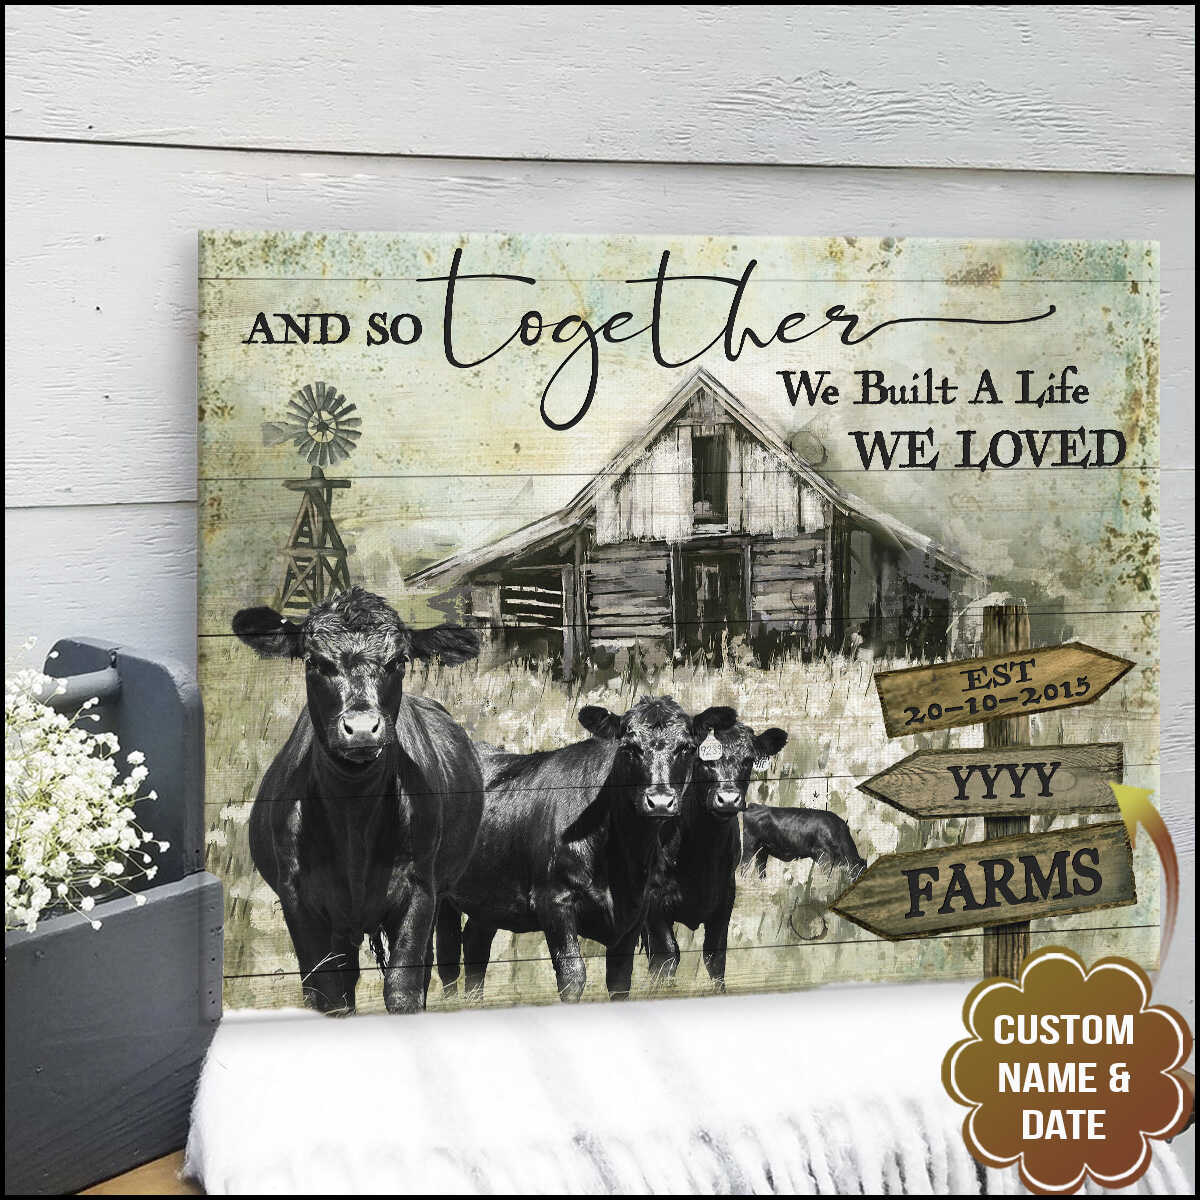 Old Barn And Angus Cows On Vintage Rustic Wood And So Together We Built A Life We Loved Farm 4622